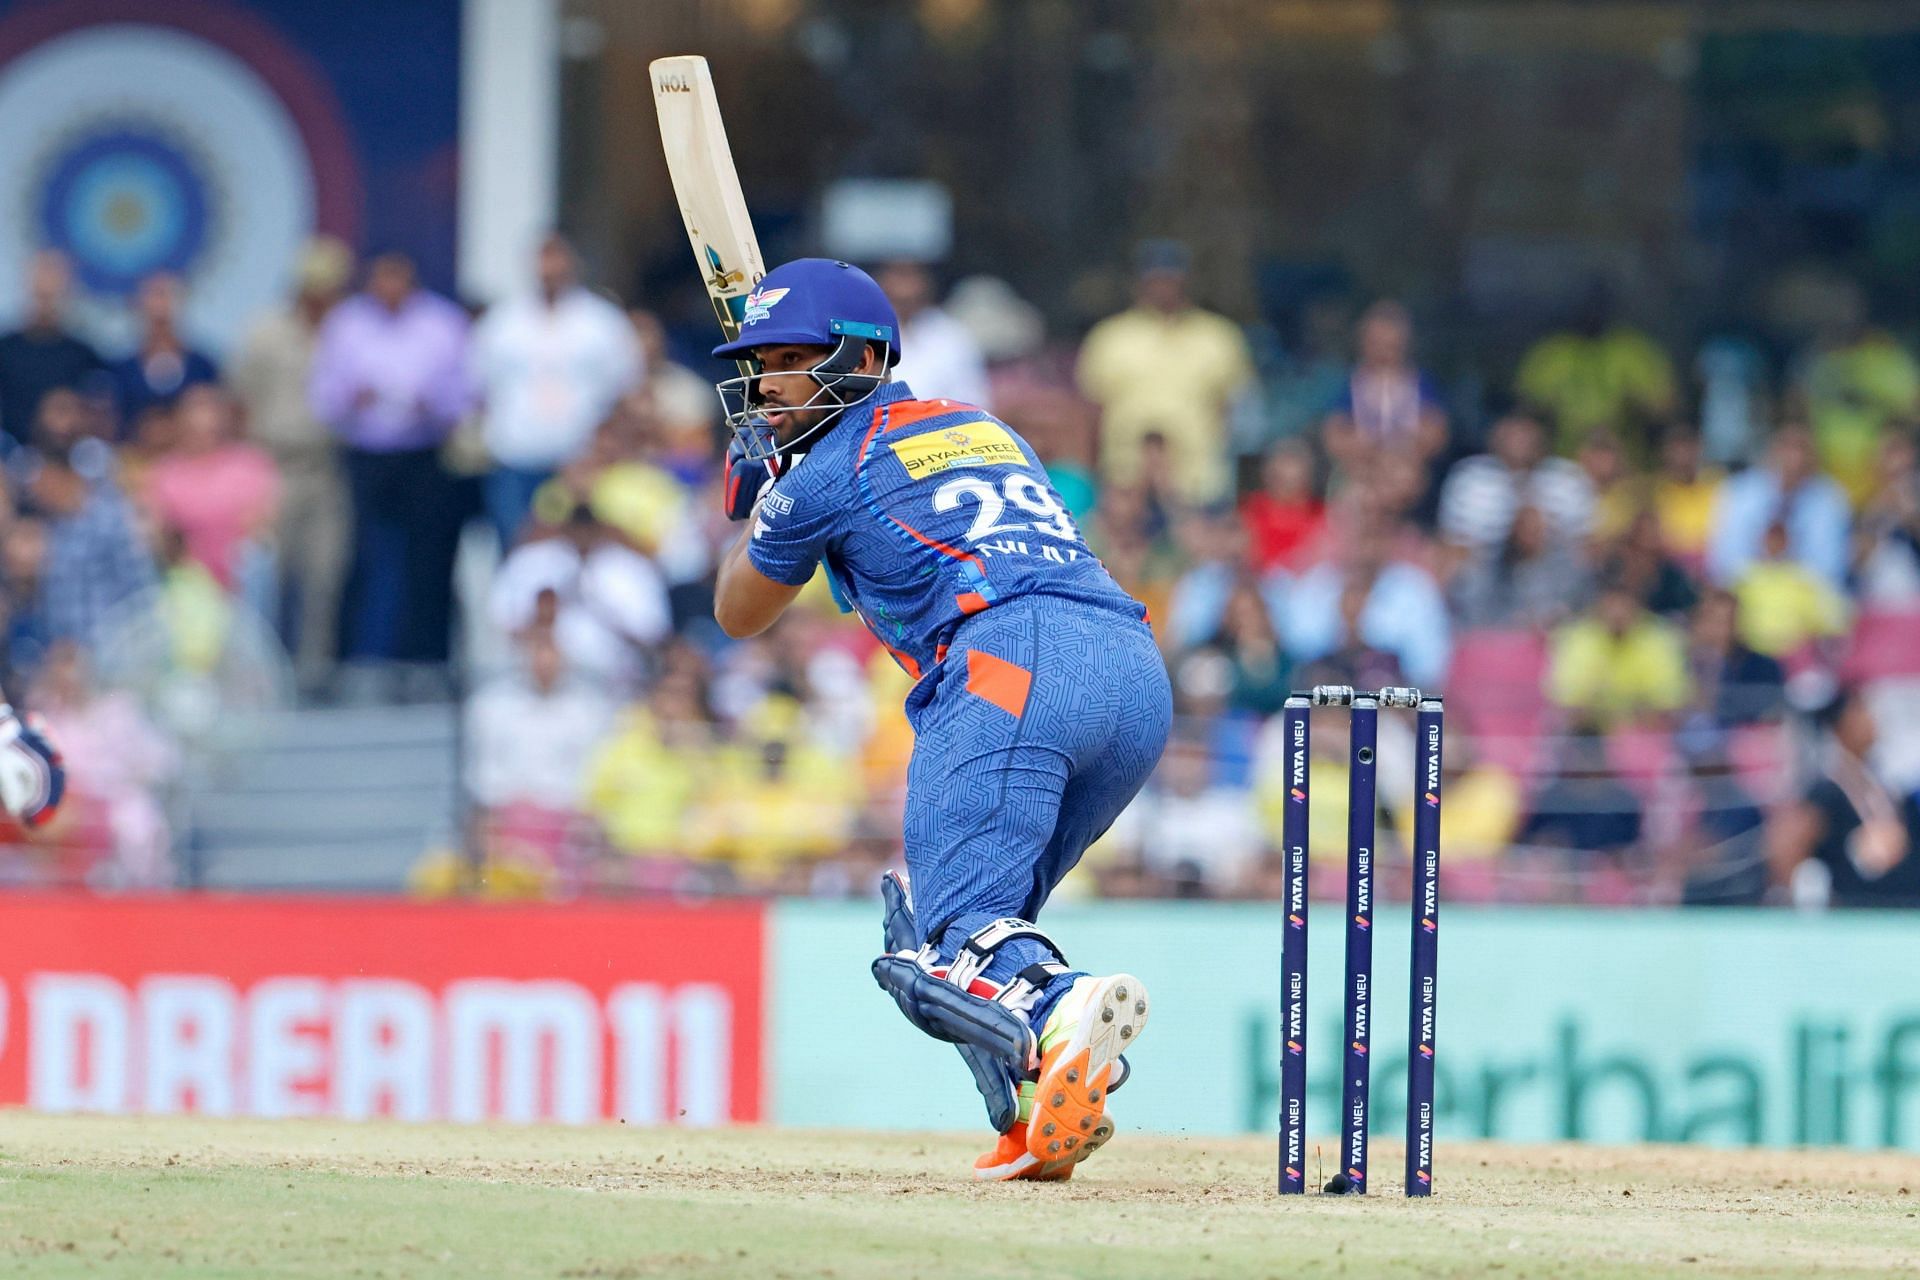 Nicholas Pooran in action (Image Courtesy: Twitter/Lucknow Super Giants)